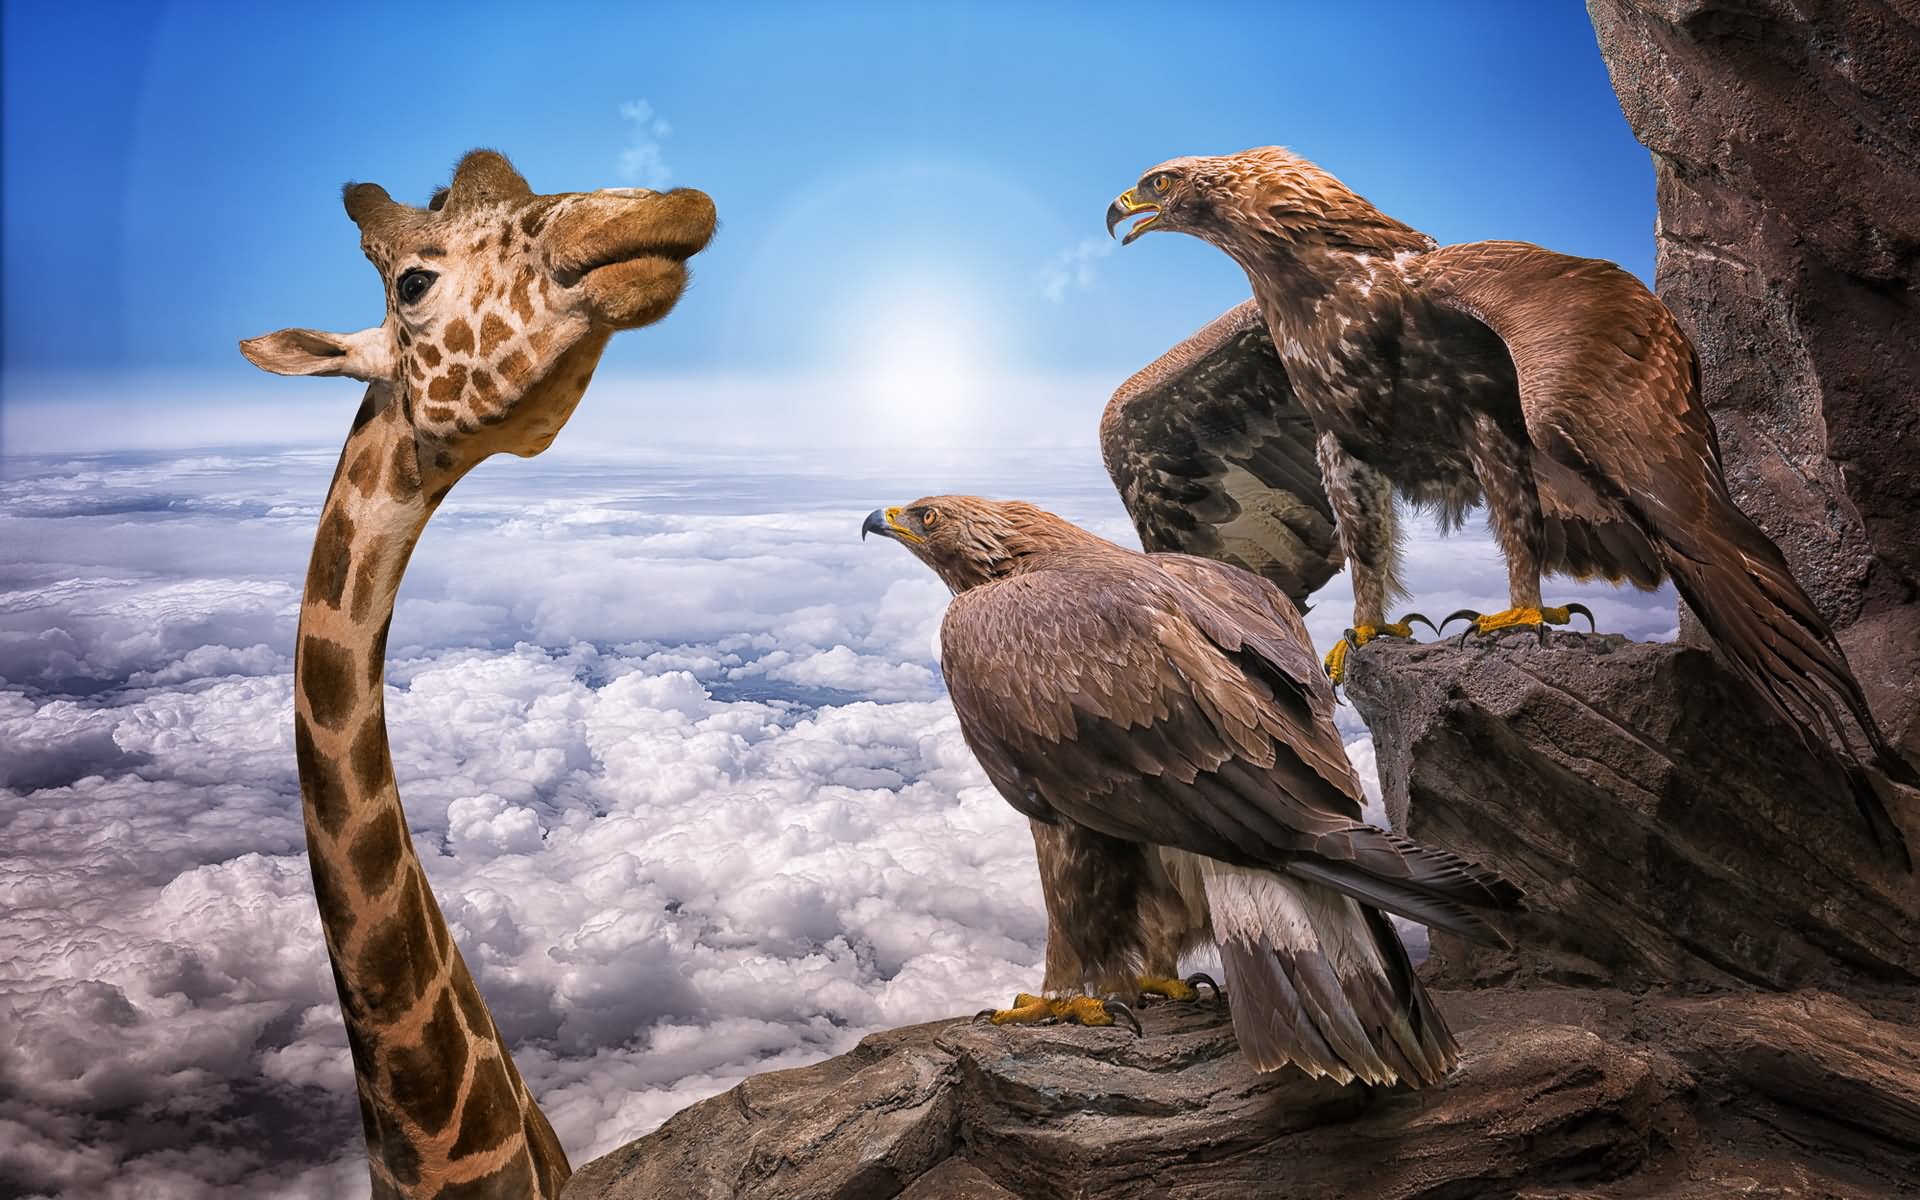 Giraffe Chatting With Eagles Funny Picture